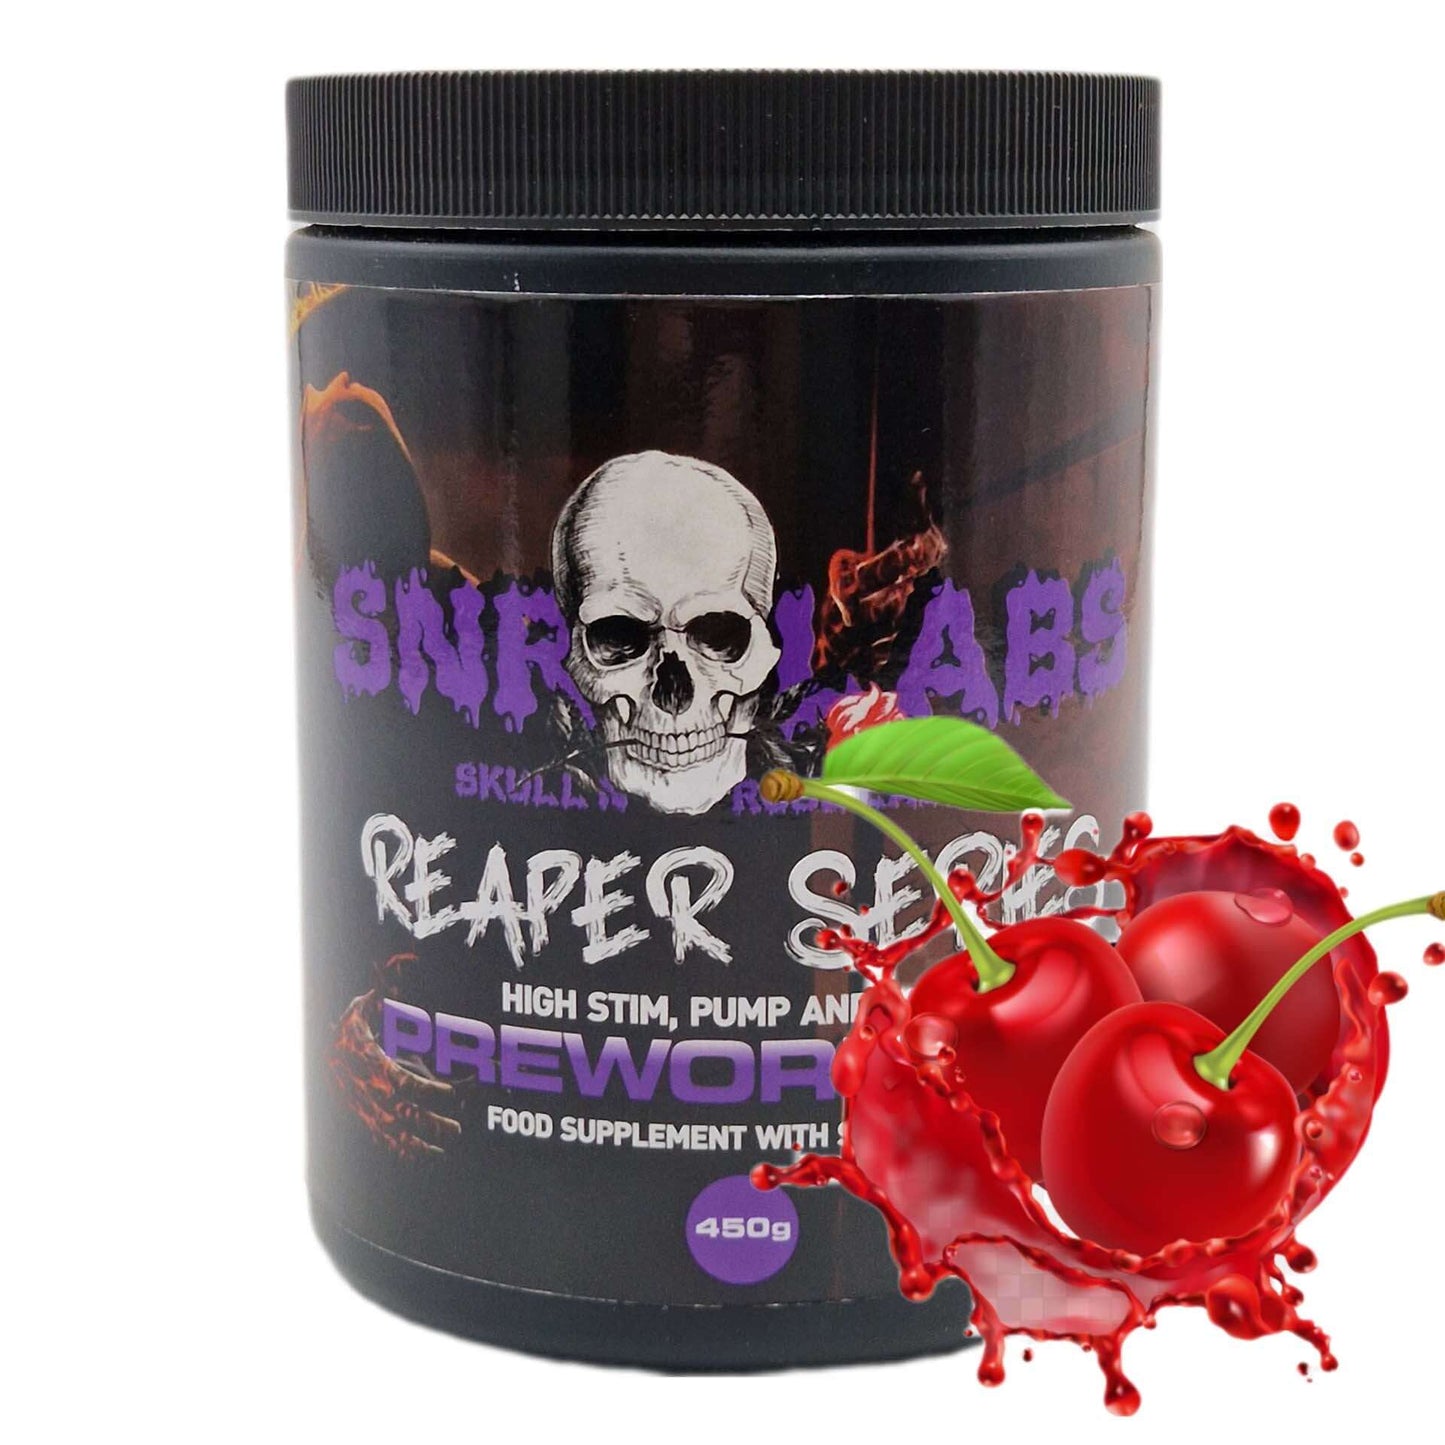 SNRLabs Reaper Series Pre Work Out cherry